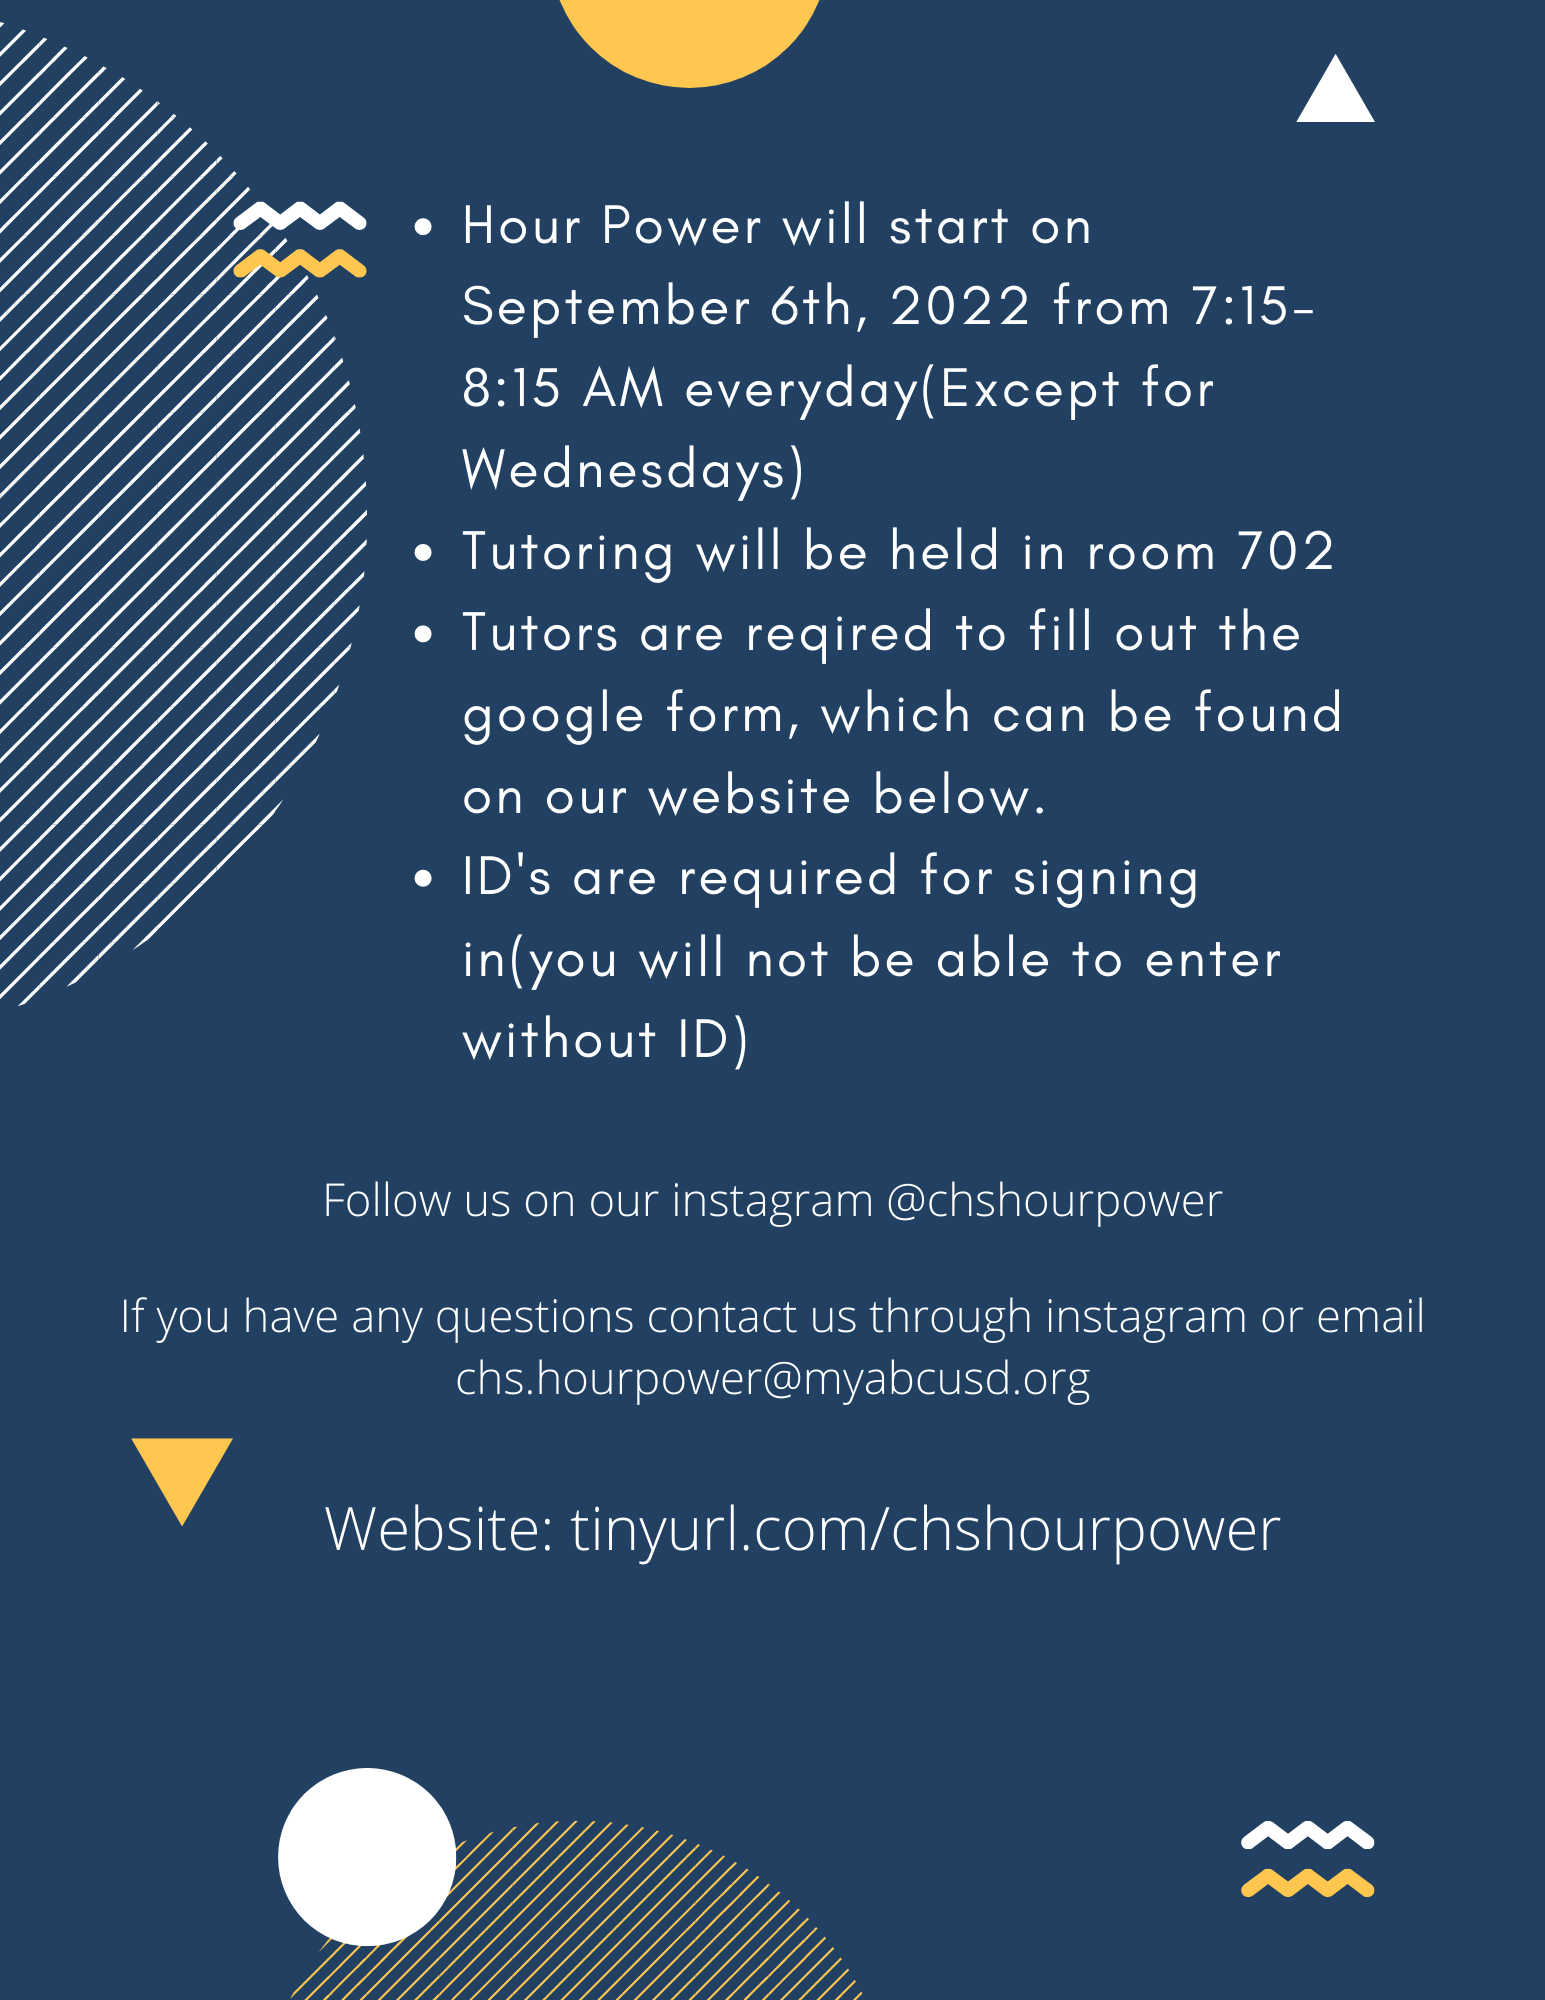 Do you need help with your homework? Or would you like to be a tutor and help others and earn community service hours? Join us at Hour Power, starting 9/6, from 7:15-8:15 am, every morning except for Wednesdays. 